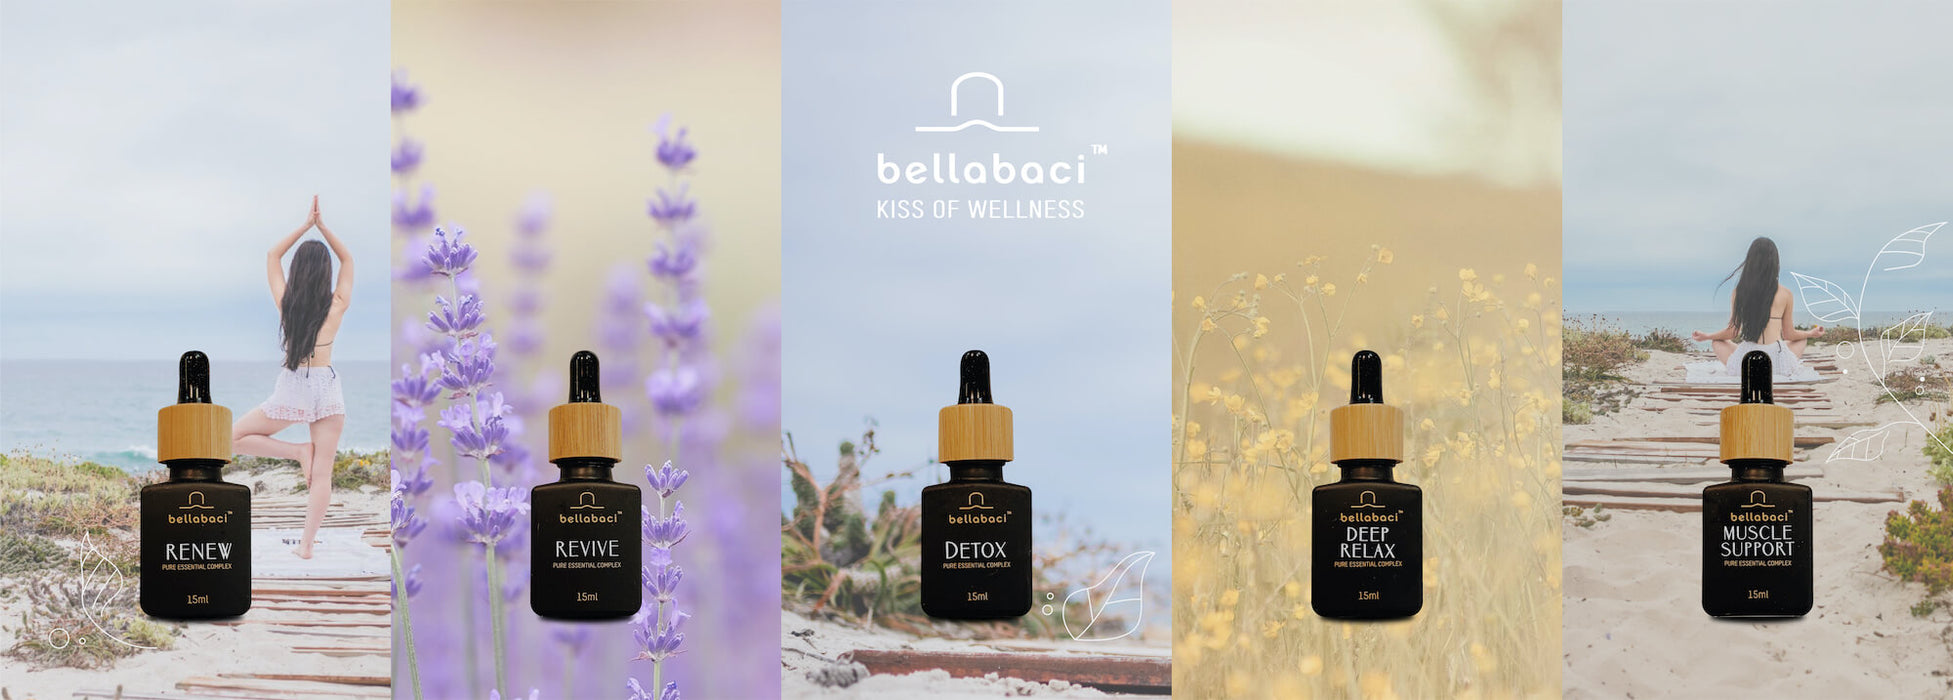 Bellabaci Essential Oil Concentrate - Deep Relax